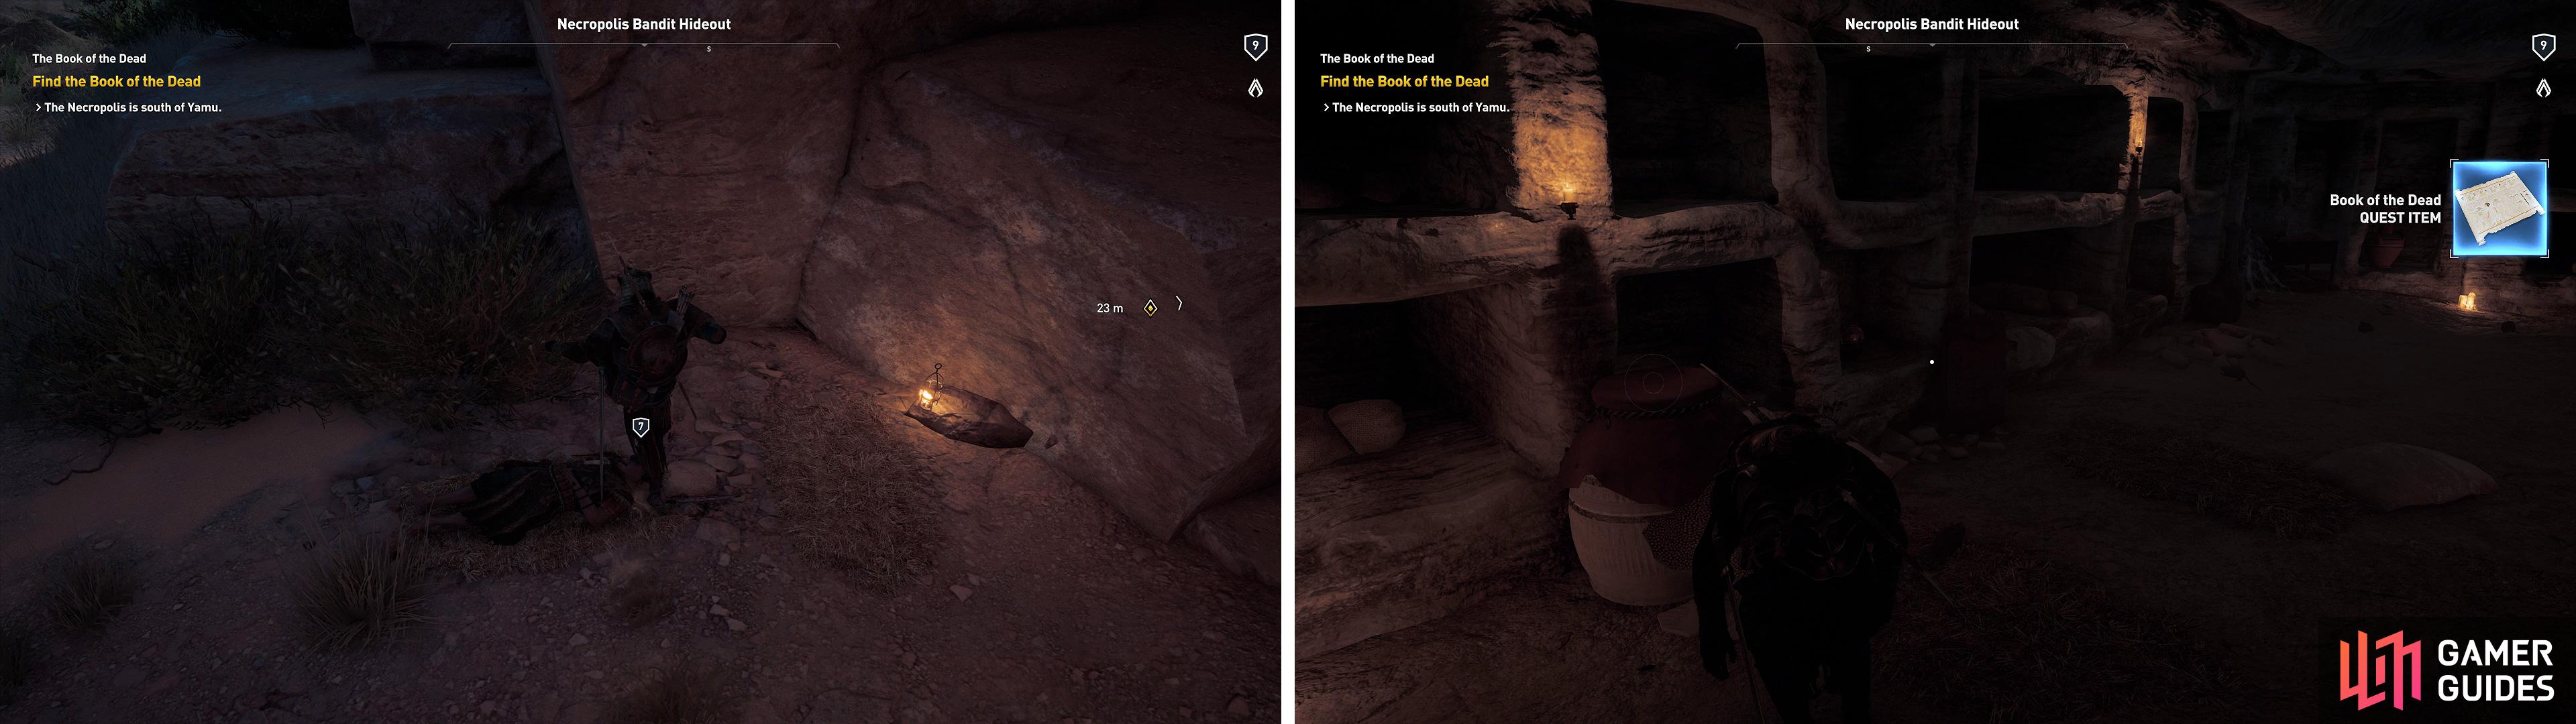 The hideout should be a lot emptier (left) if you cleared it out earlier. Head beneath the surface to recover the book (right) then return it to its owner.